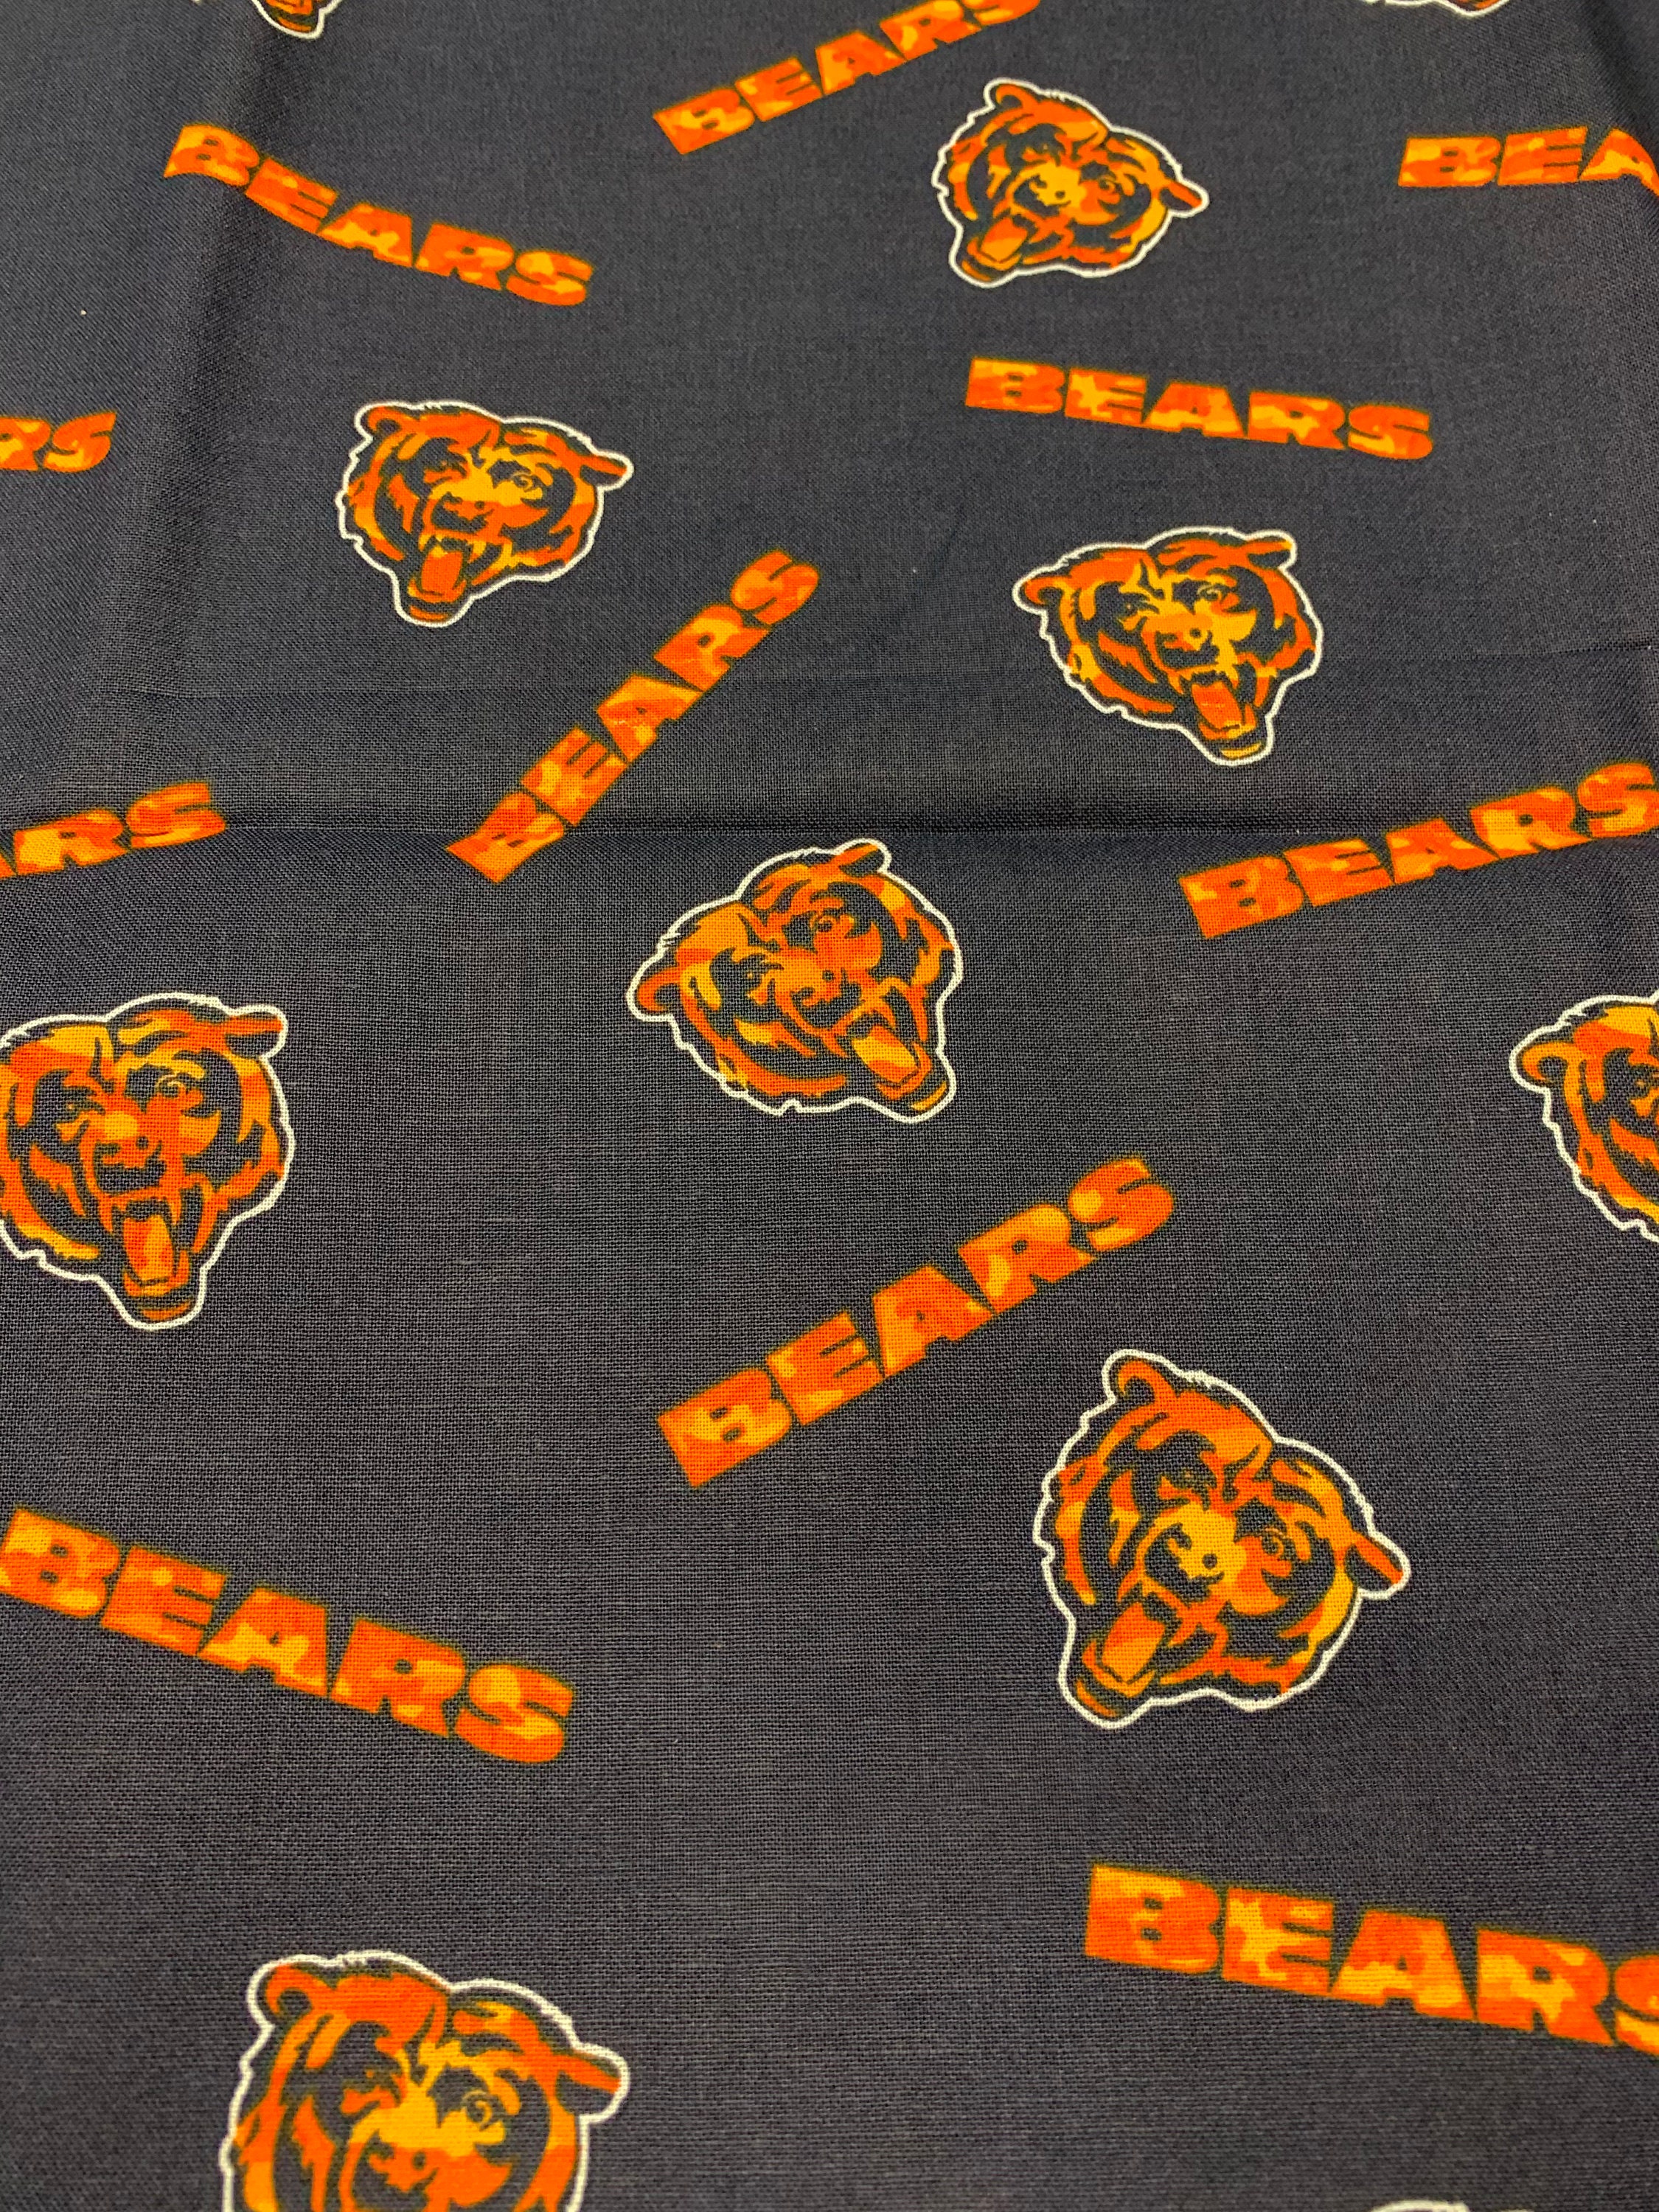 Chicago Bears NFL Cotton Fabric Sold by the HALF YARD | Etsy